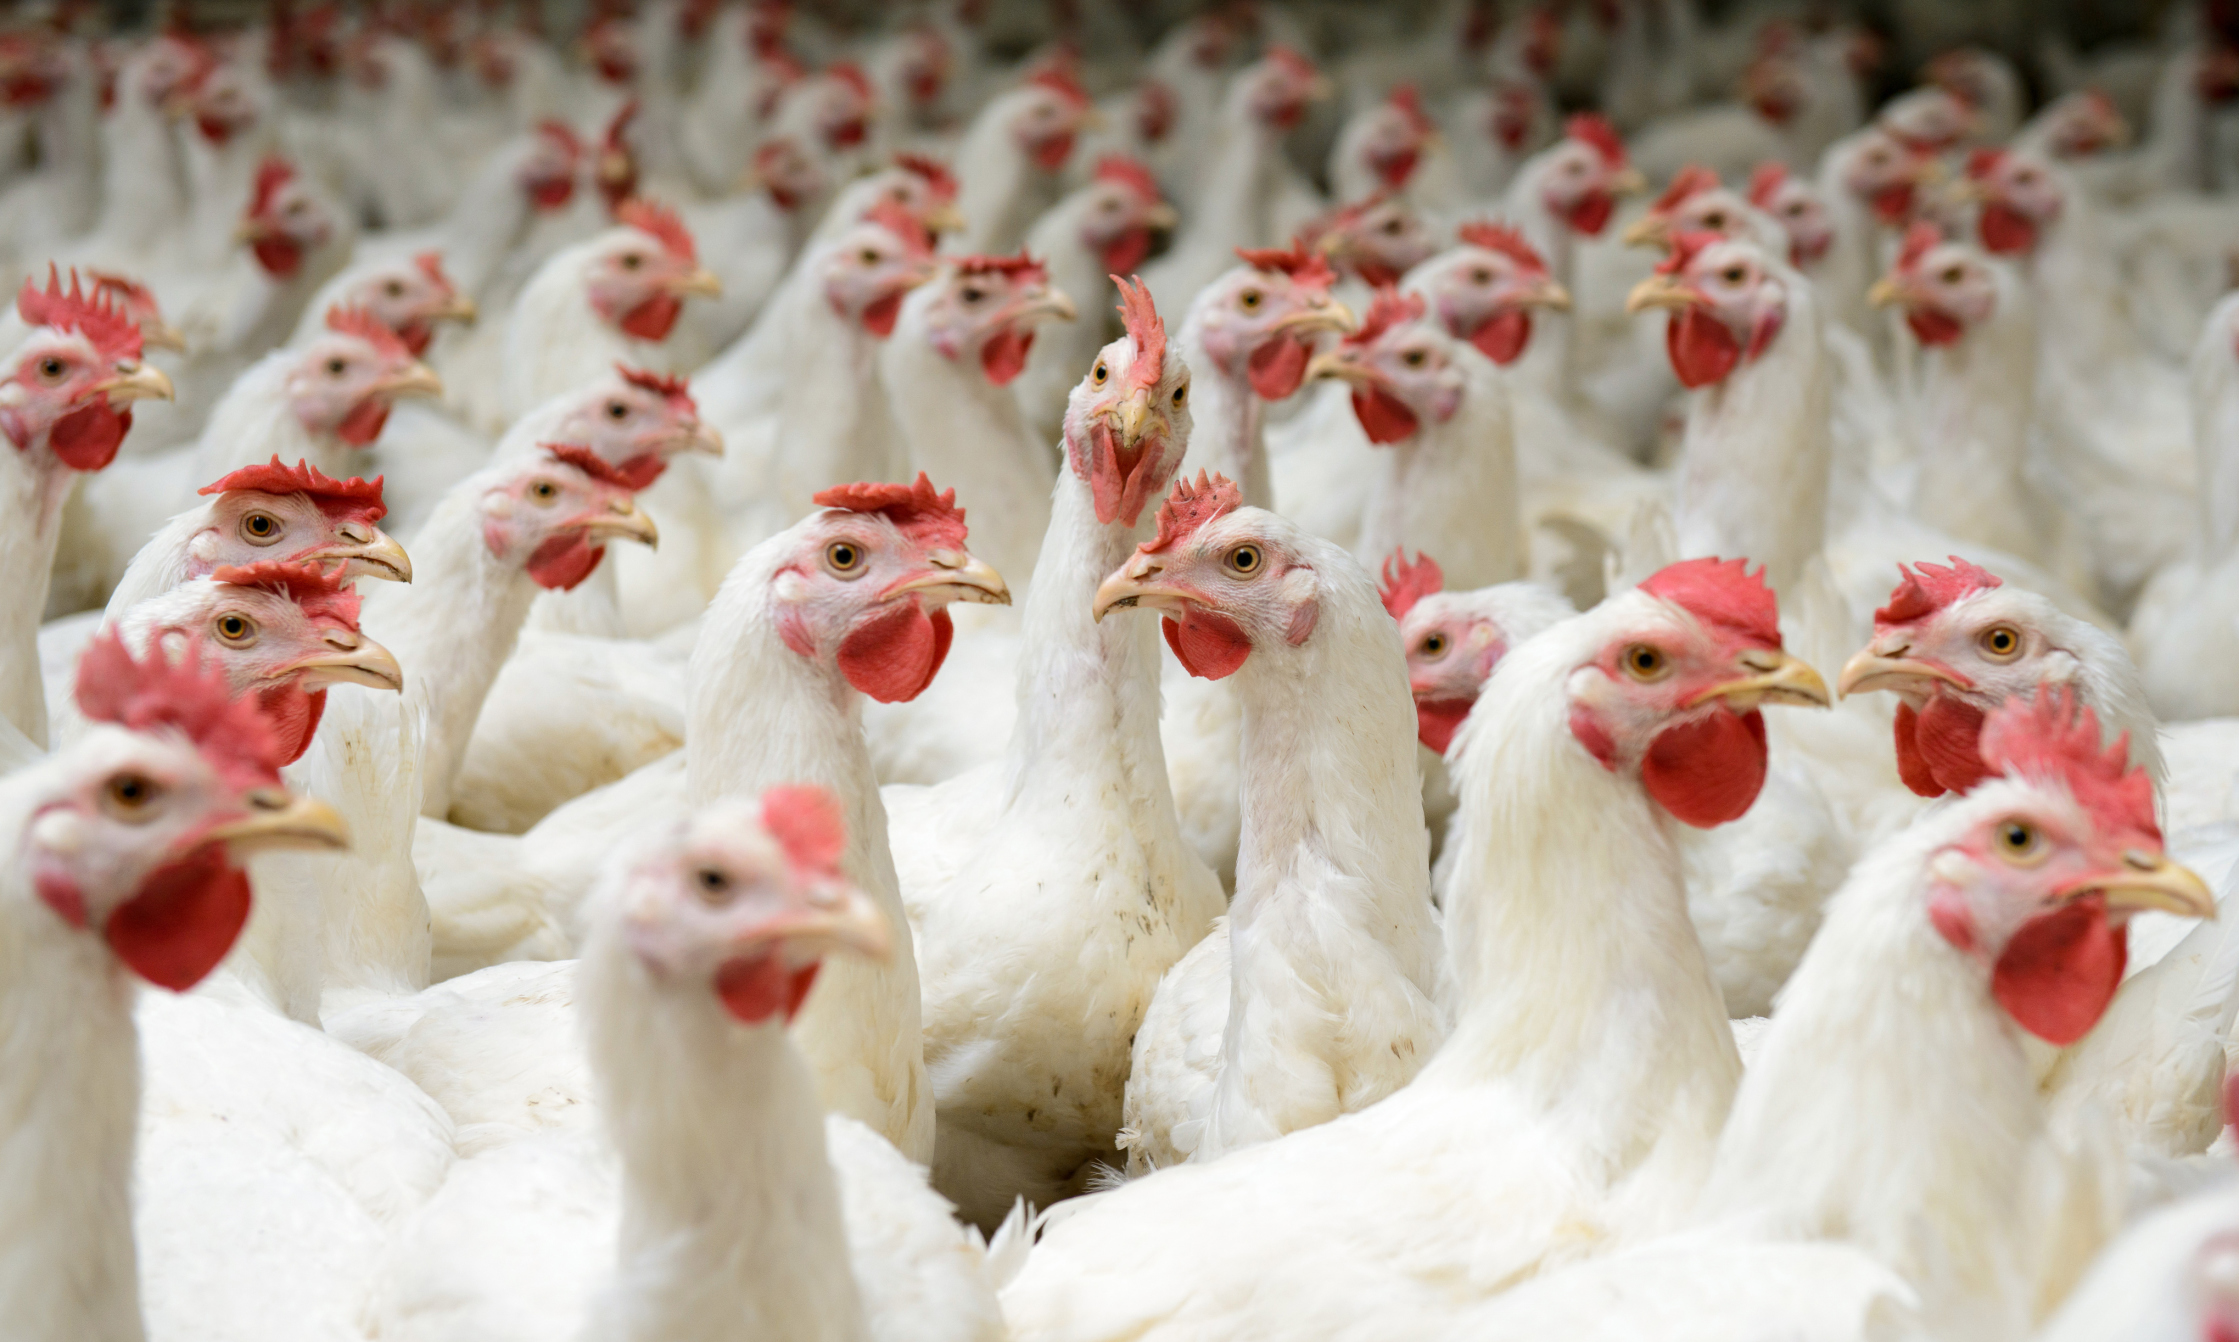 France hit by multi-national poultry ban